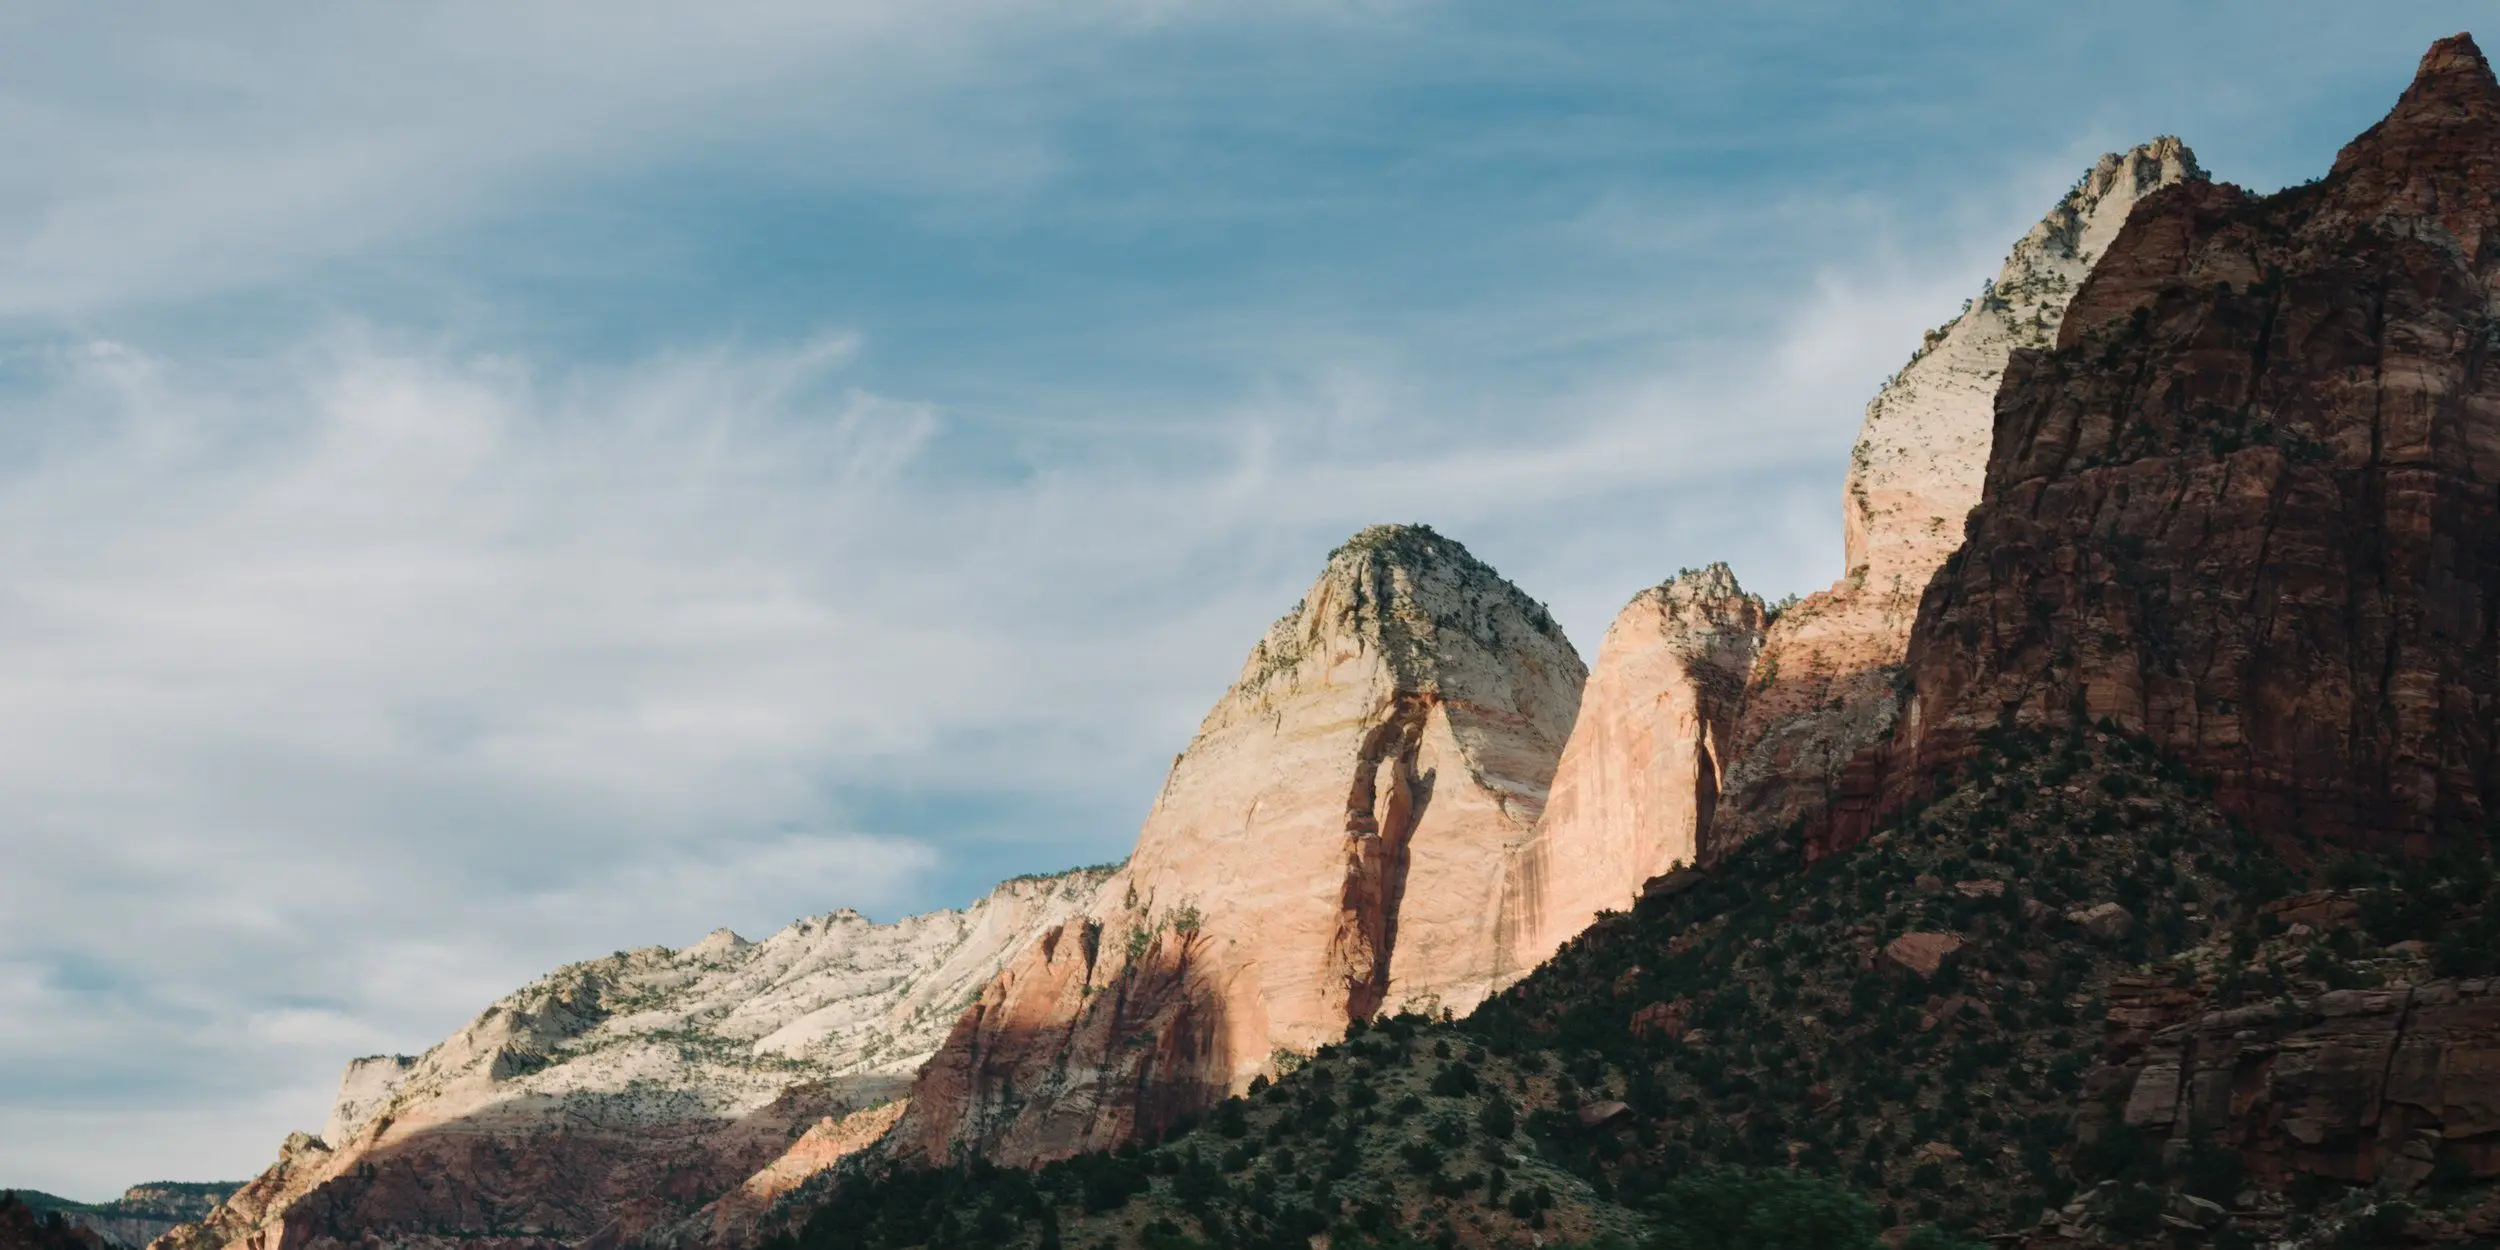 Mountains under wispy clouds through the Zion – Mount Carmel Highway at sunset.